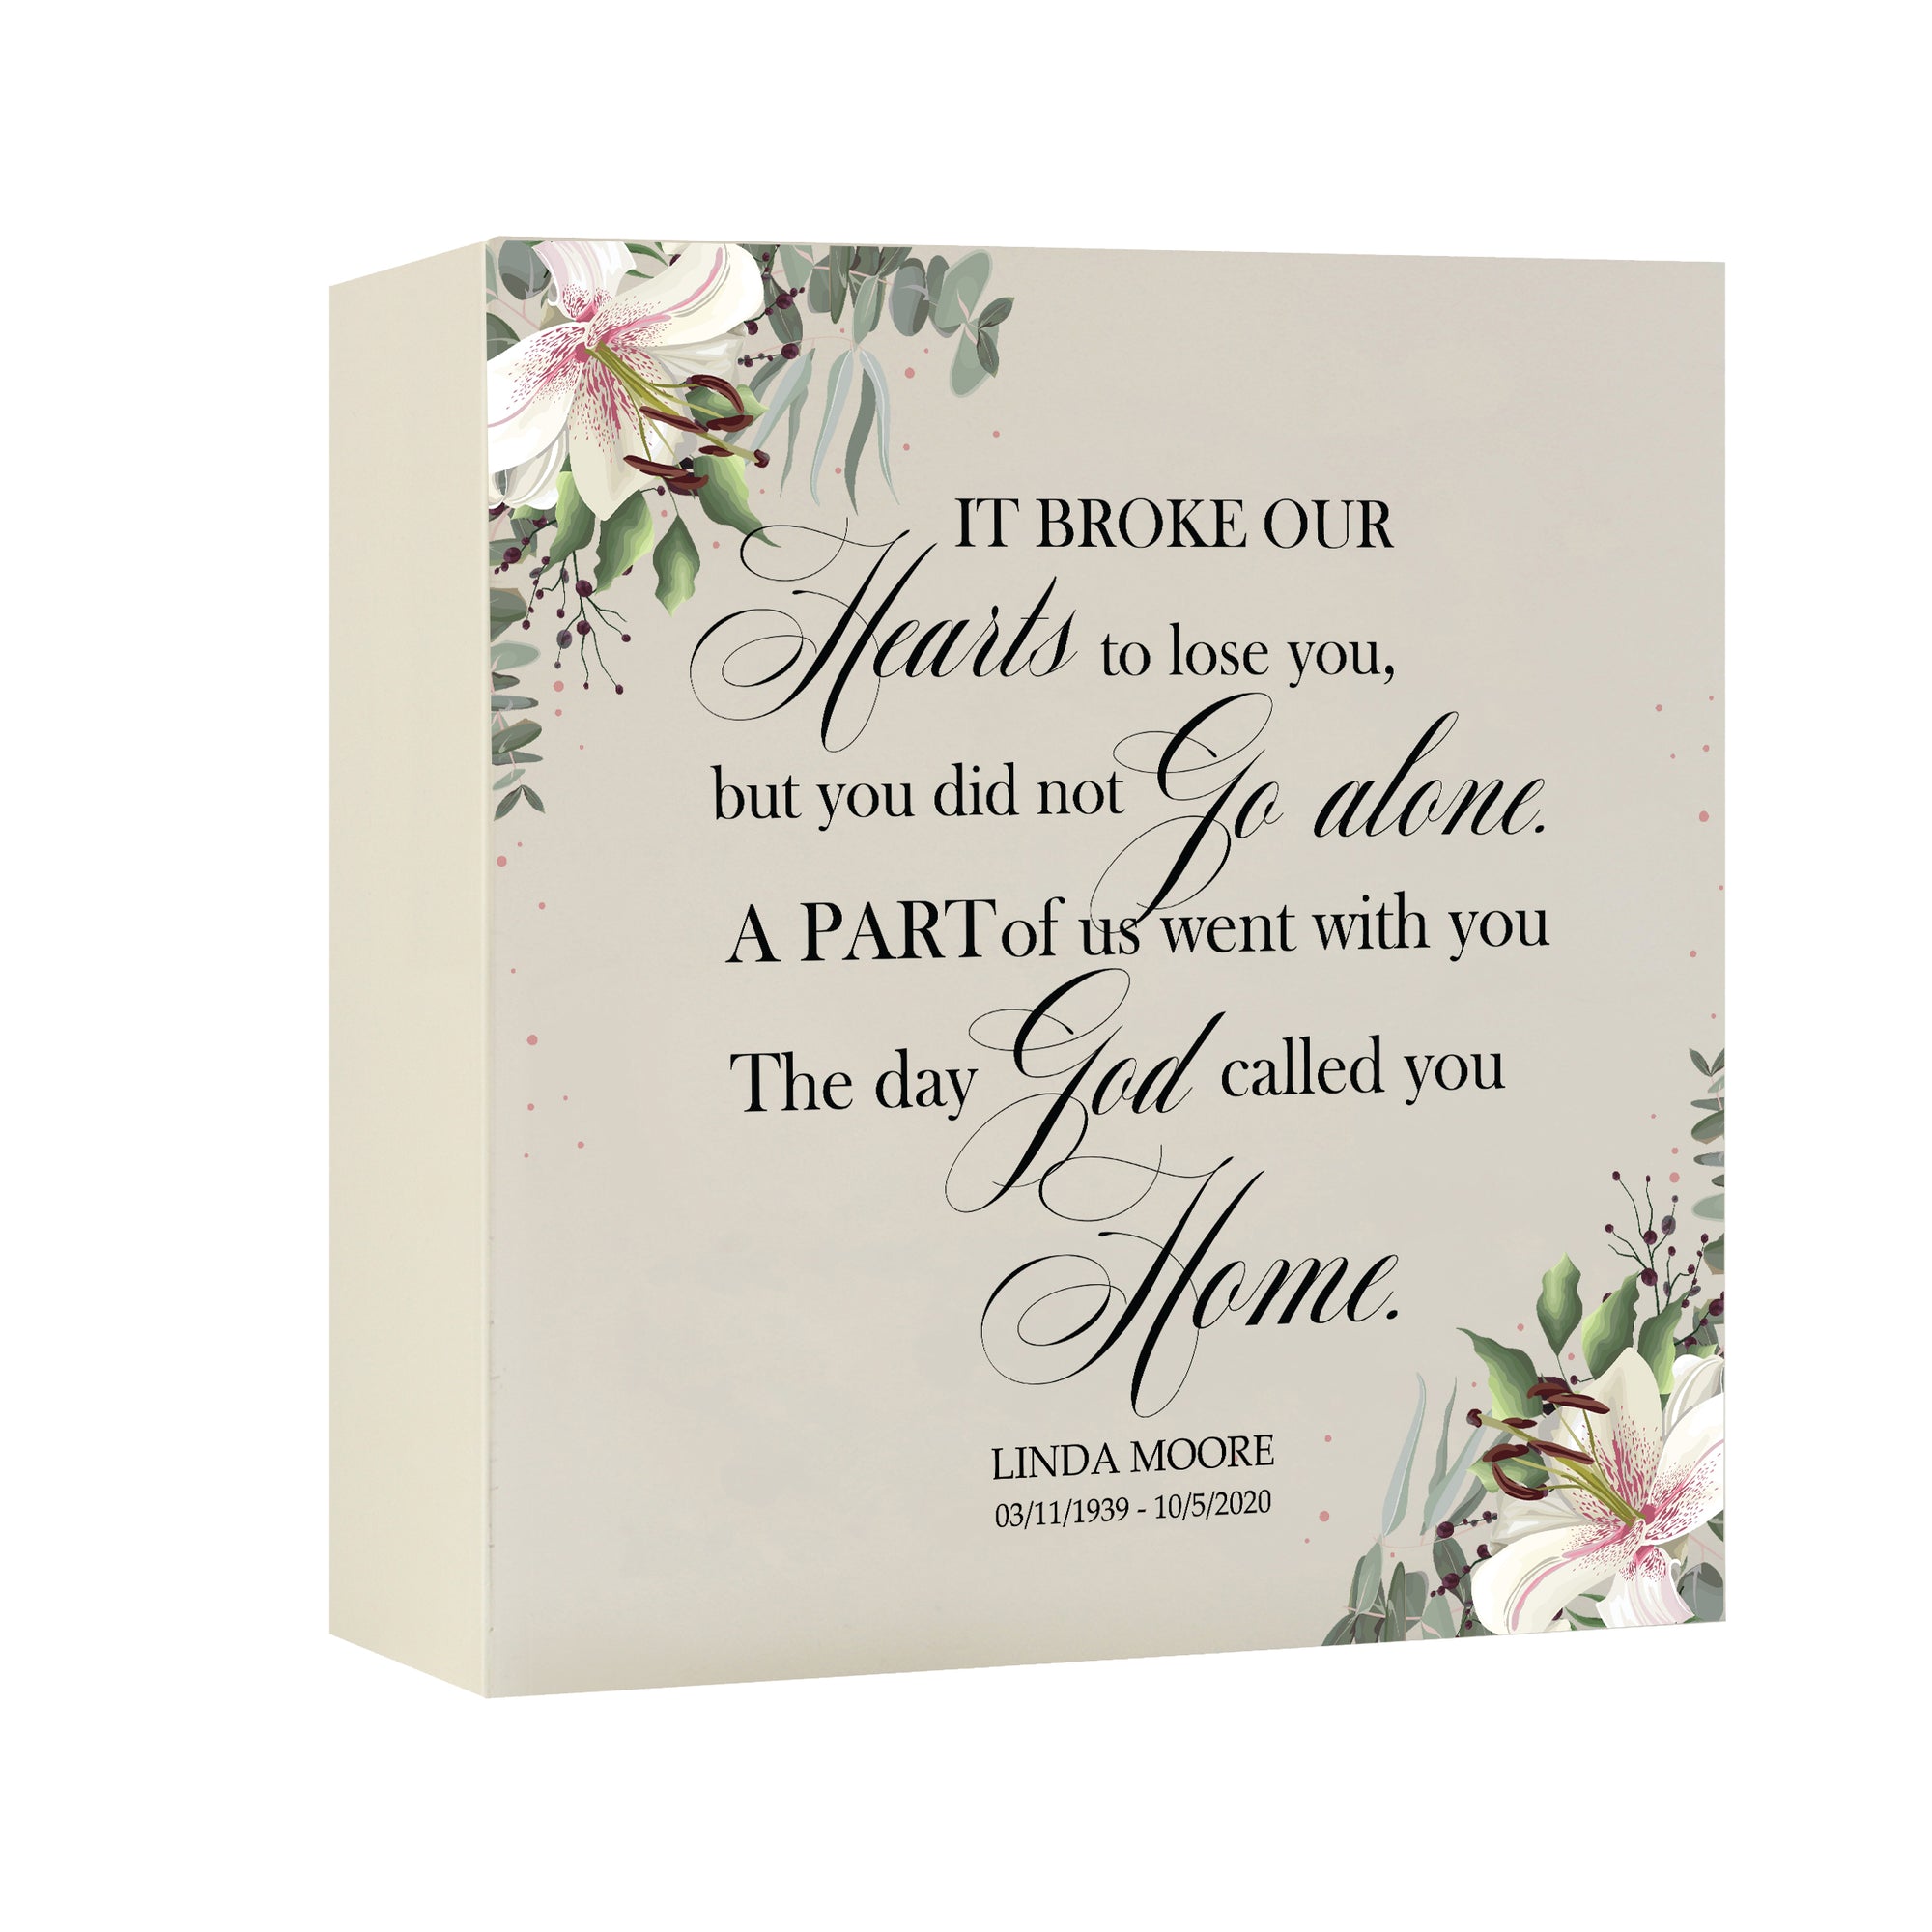 Timeless Human Memorial Shadow Box Urn With Inspirational Verse in Ivory - It Broke Our Hearts